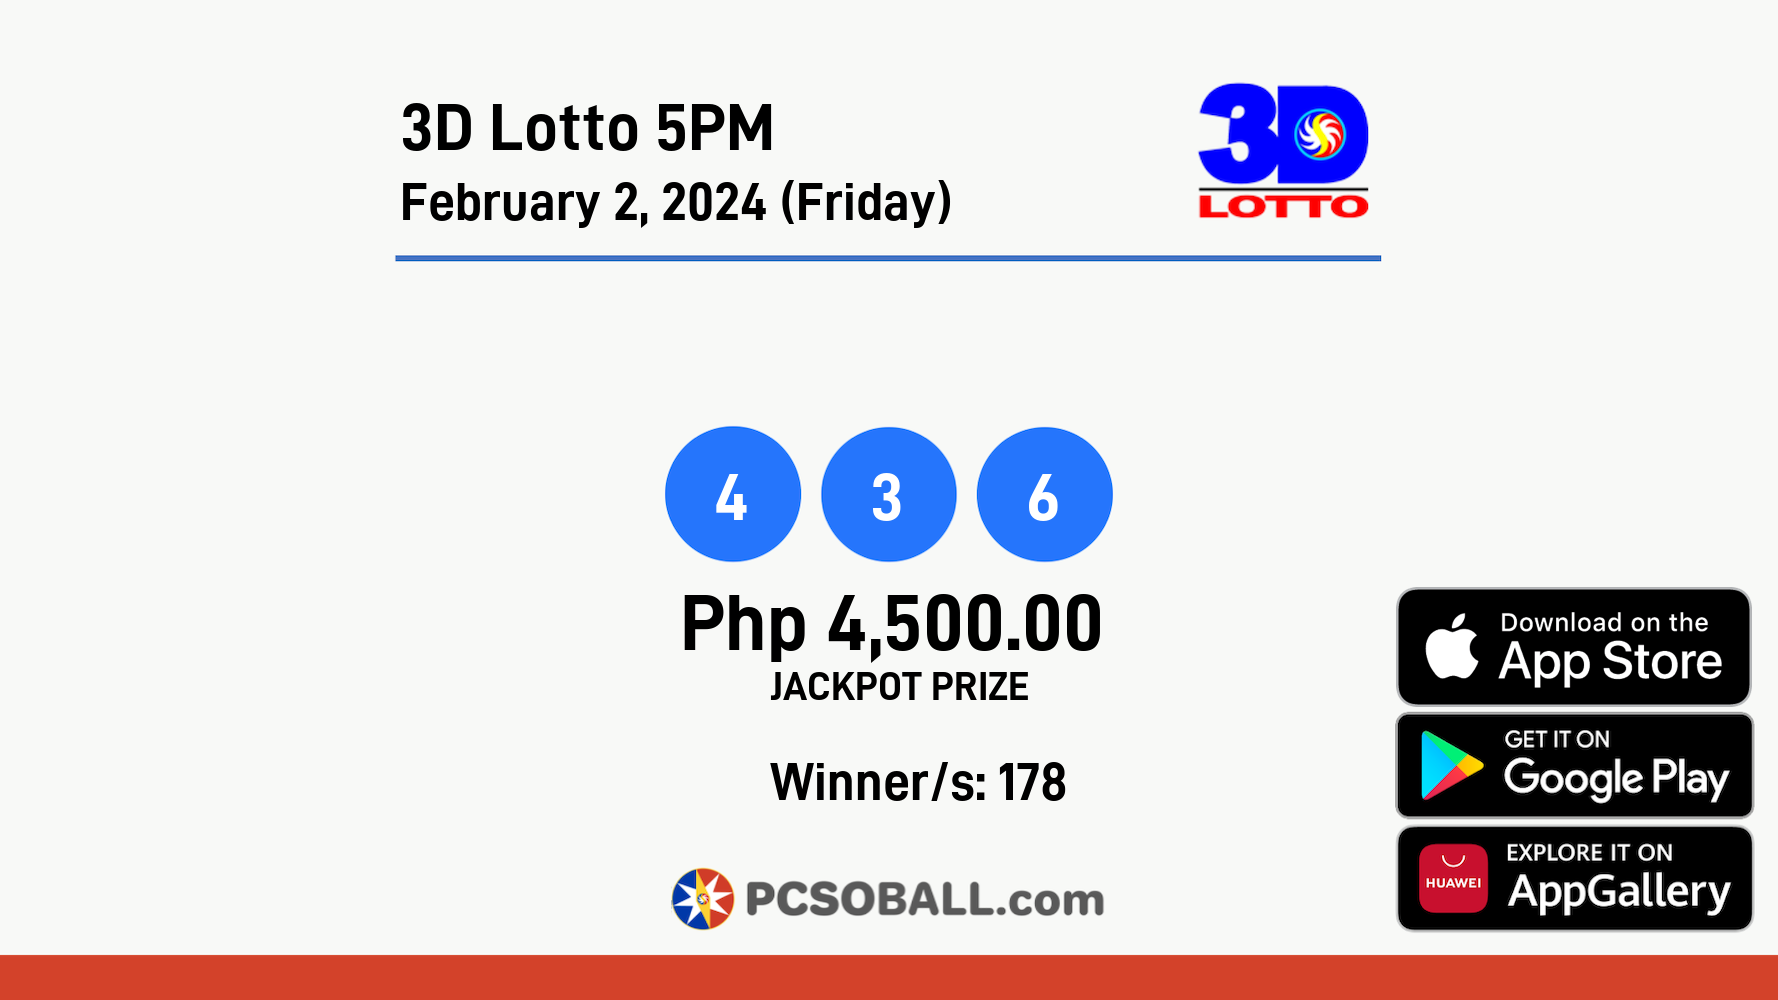 3D Lotto 5PM February 2, 2024 (Friday) Result